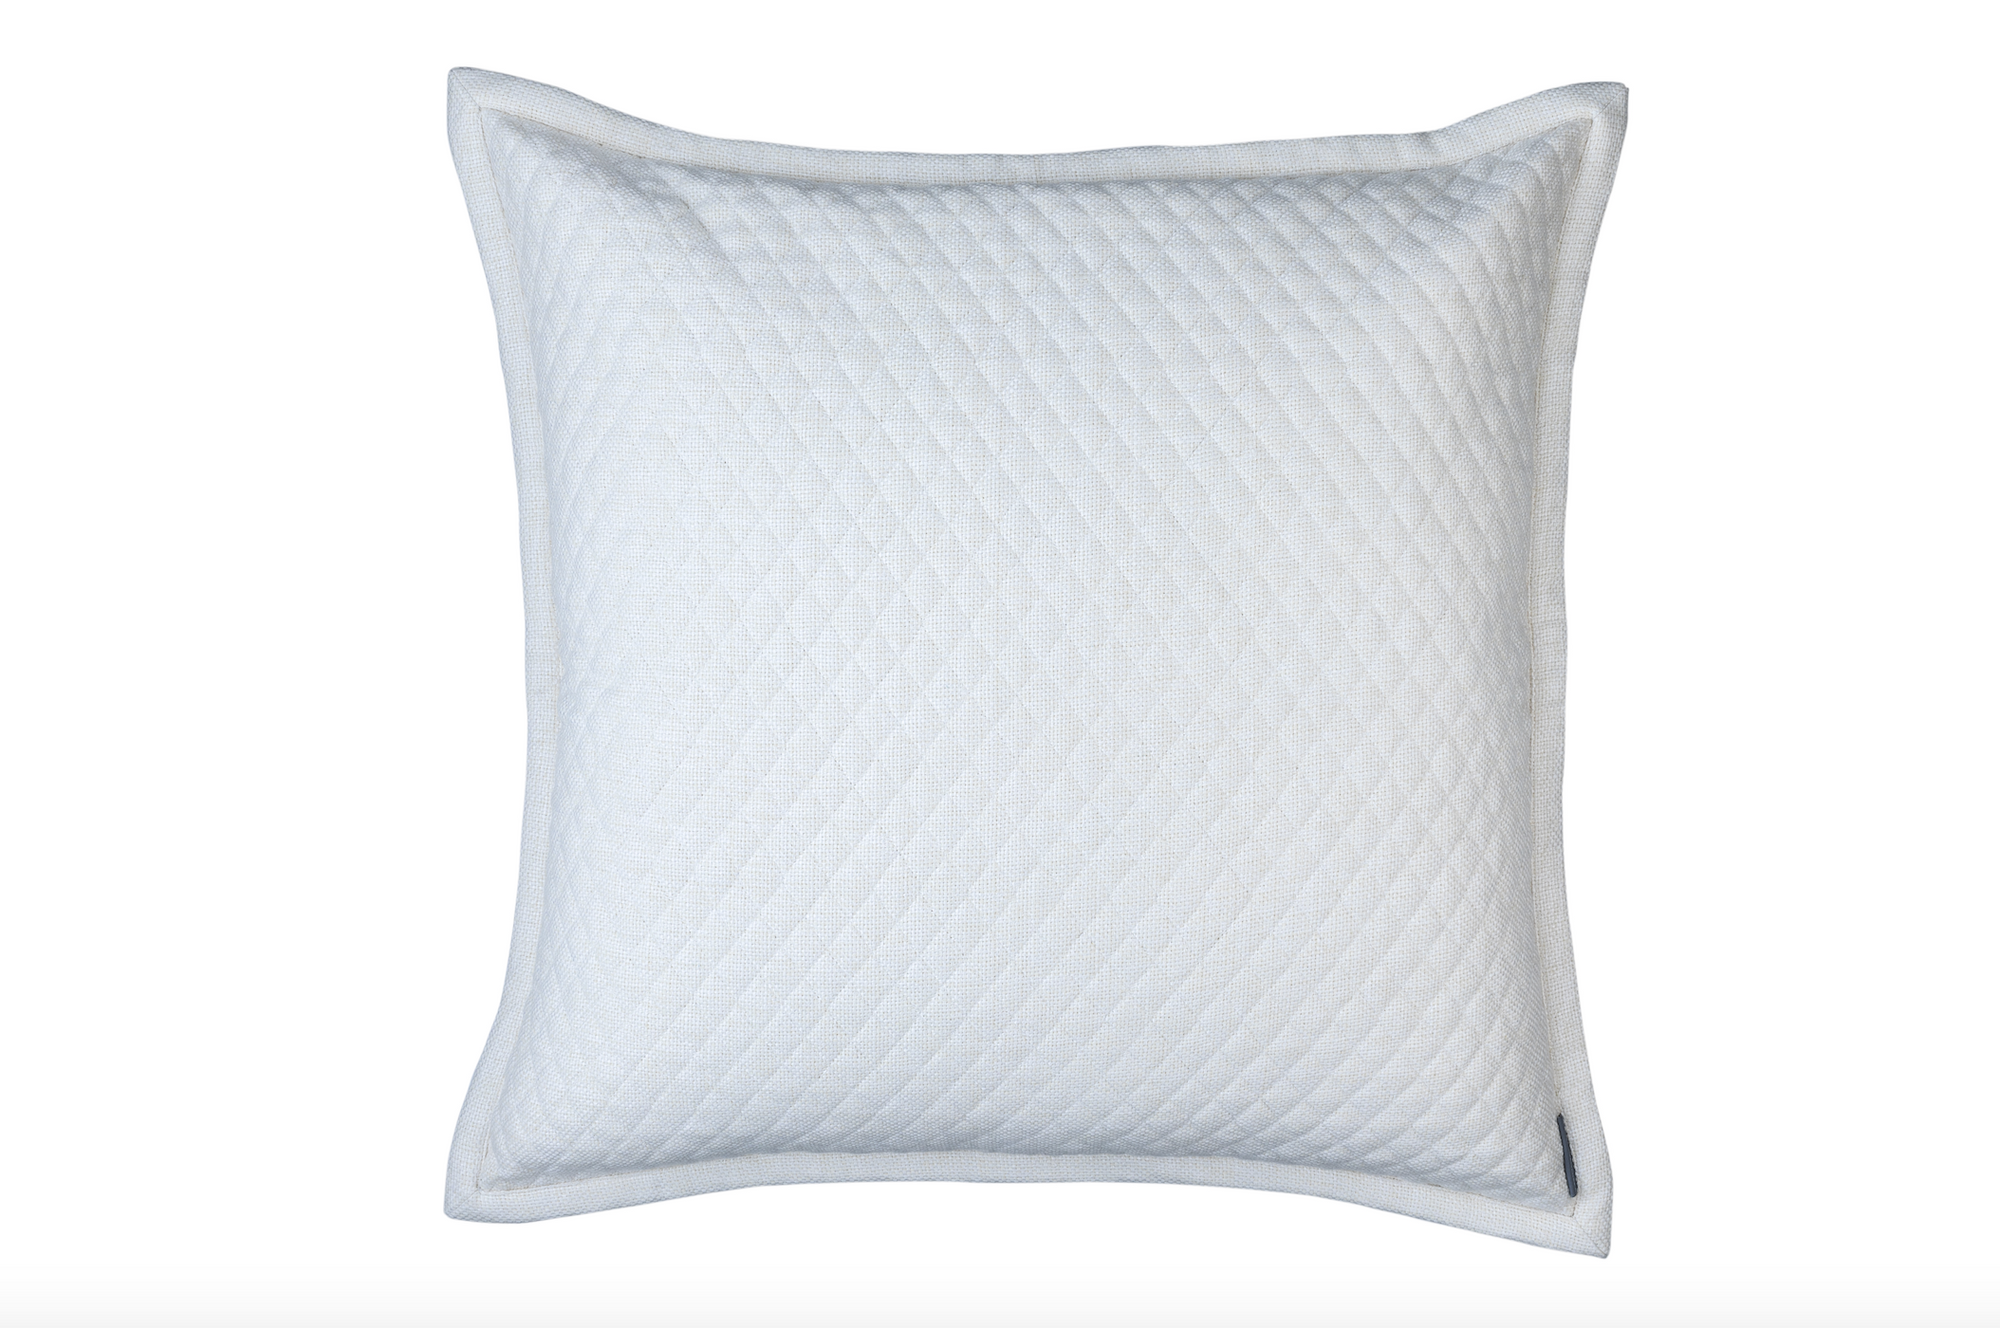 Lili Alessandra Laurie Quilted Ivory Basketweave Euro Pillow